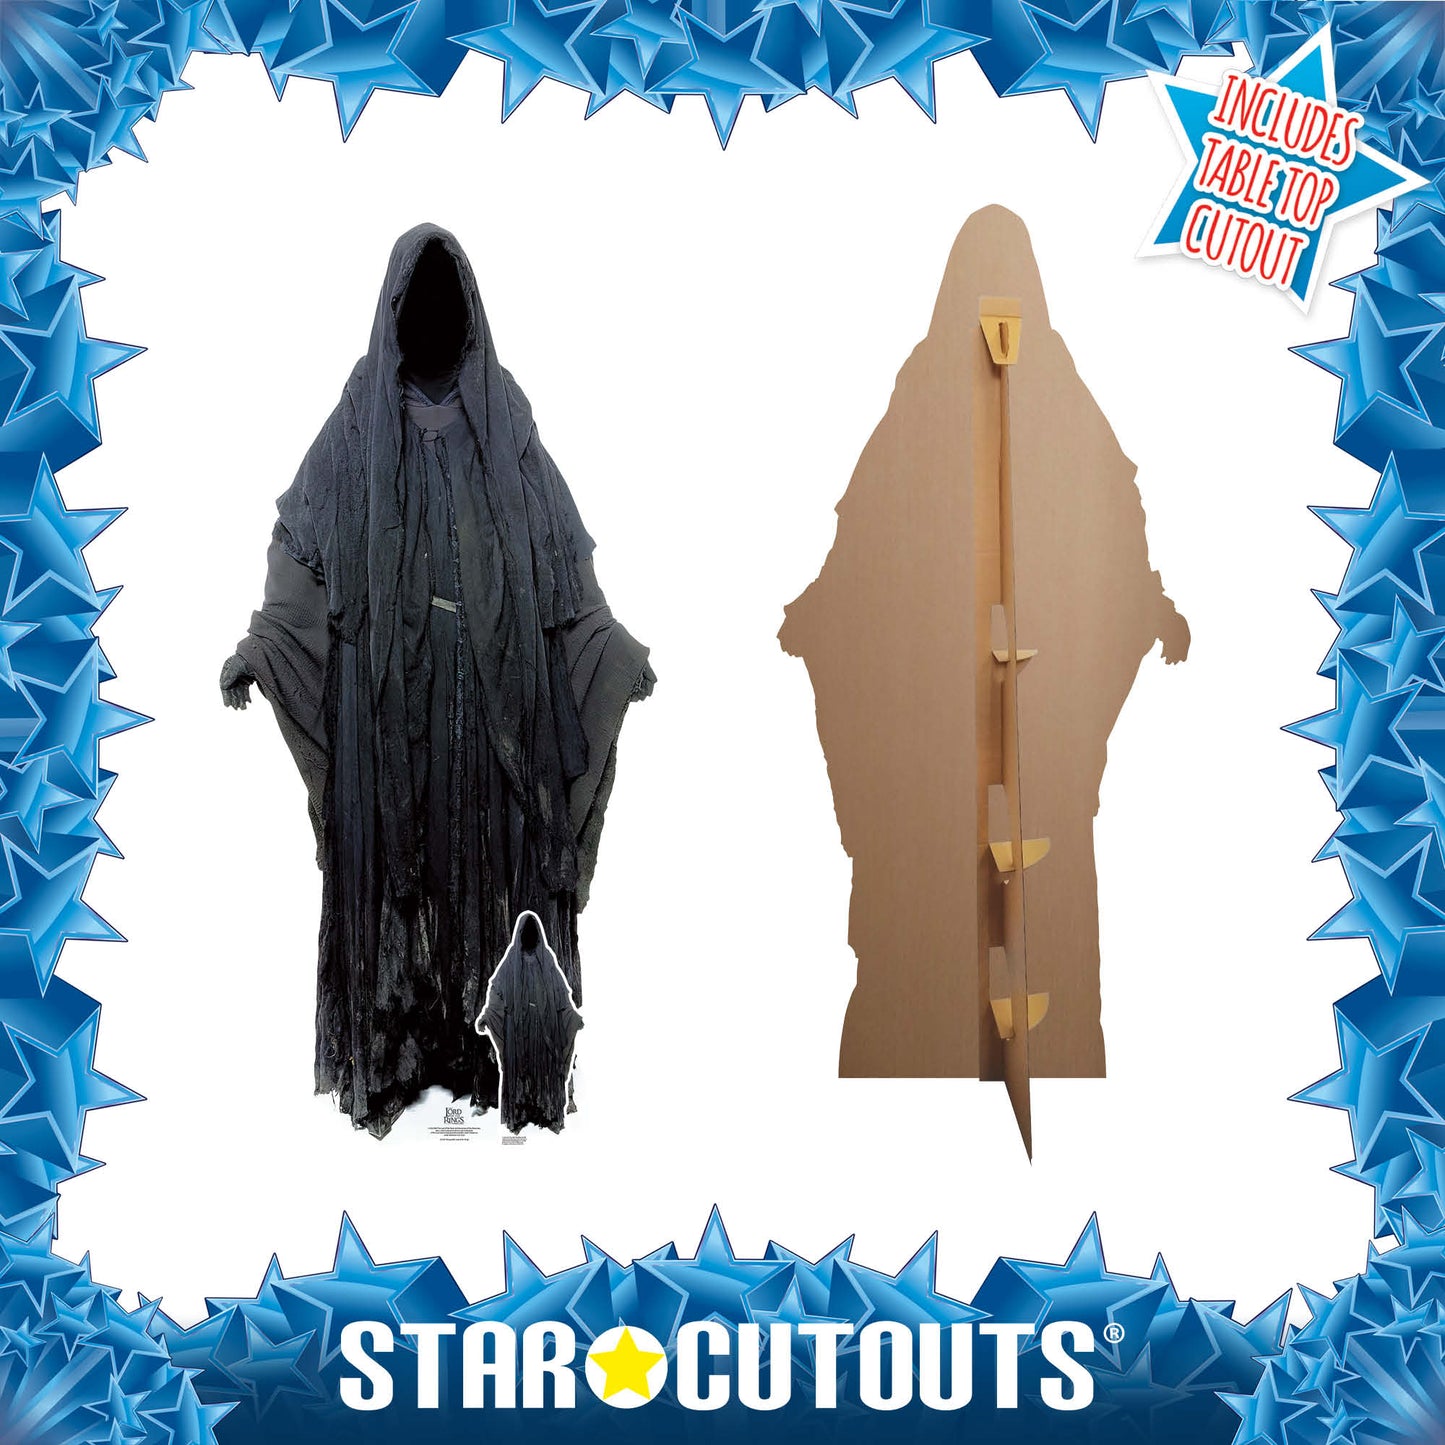 Ringwraith Lord of the Rings Cardboard Cutout